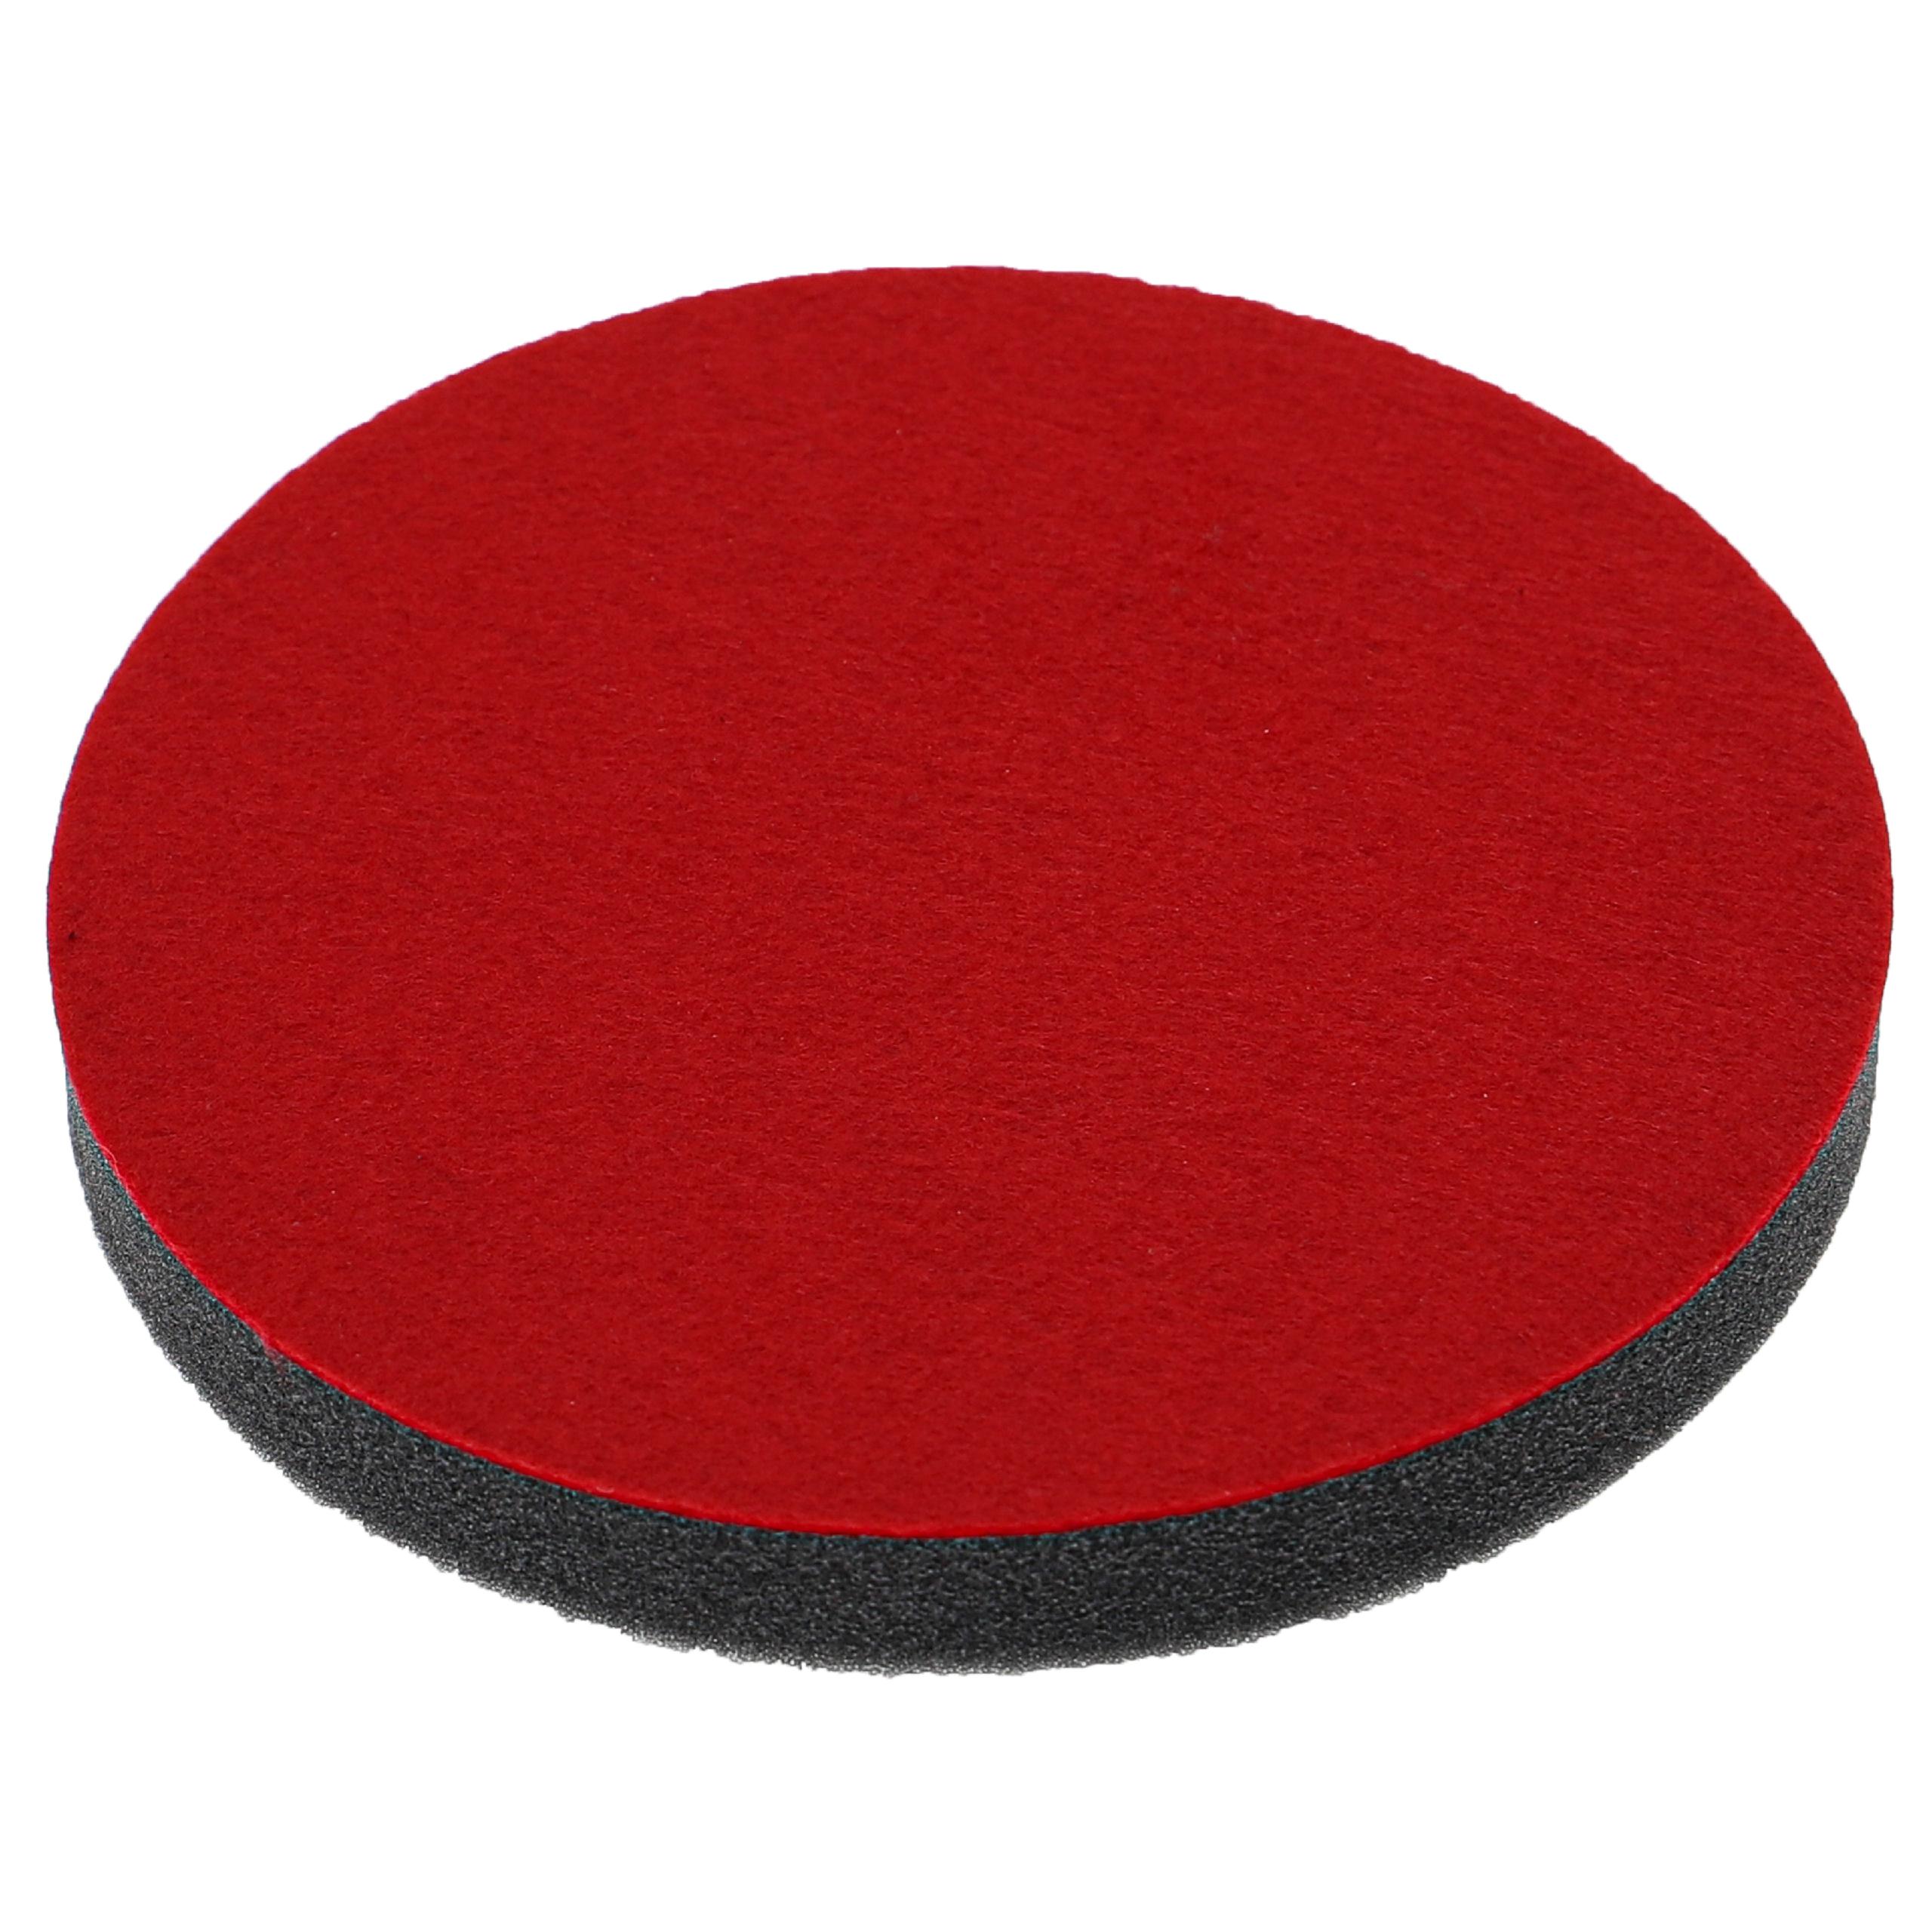 Polishing Pad as Replacement for Bosch 2609256051 for Polishing Machines - 12.5 cm Diameter, 8 g